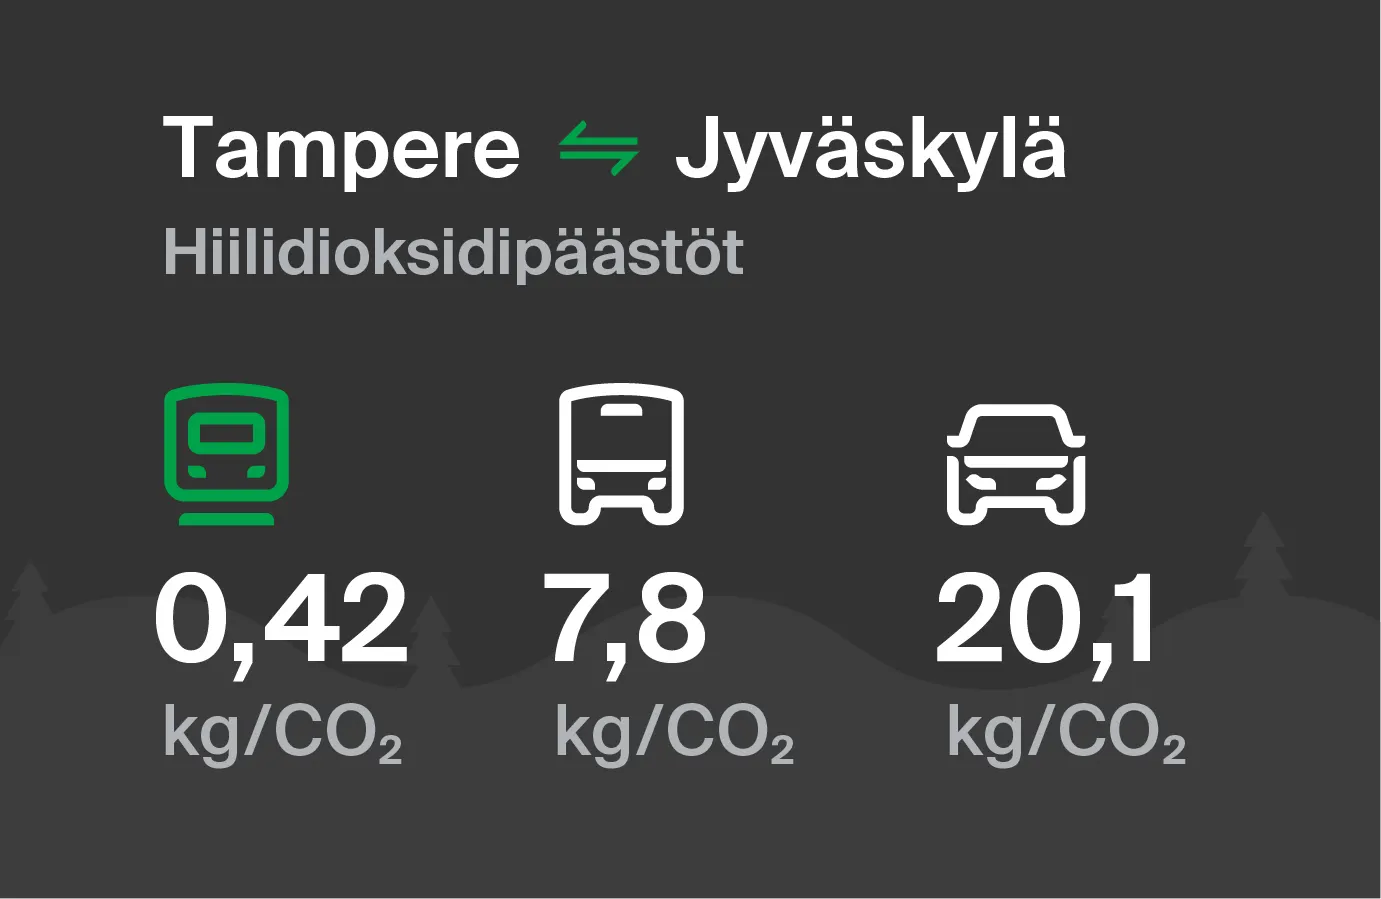 Carbon dioxide emissions from Tampere to Jyväskylä by different modes of transport: by train 0.42 kg/CO2, by bus 7.8 kg/CO2 and by car 20.1 kg/CO2.